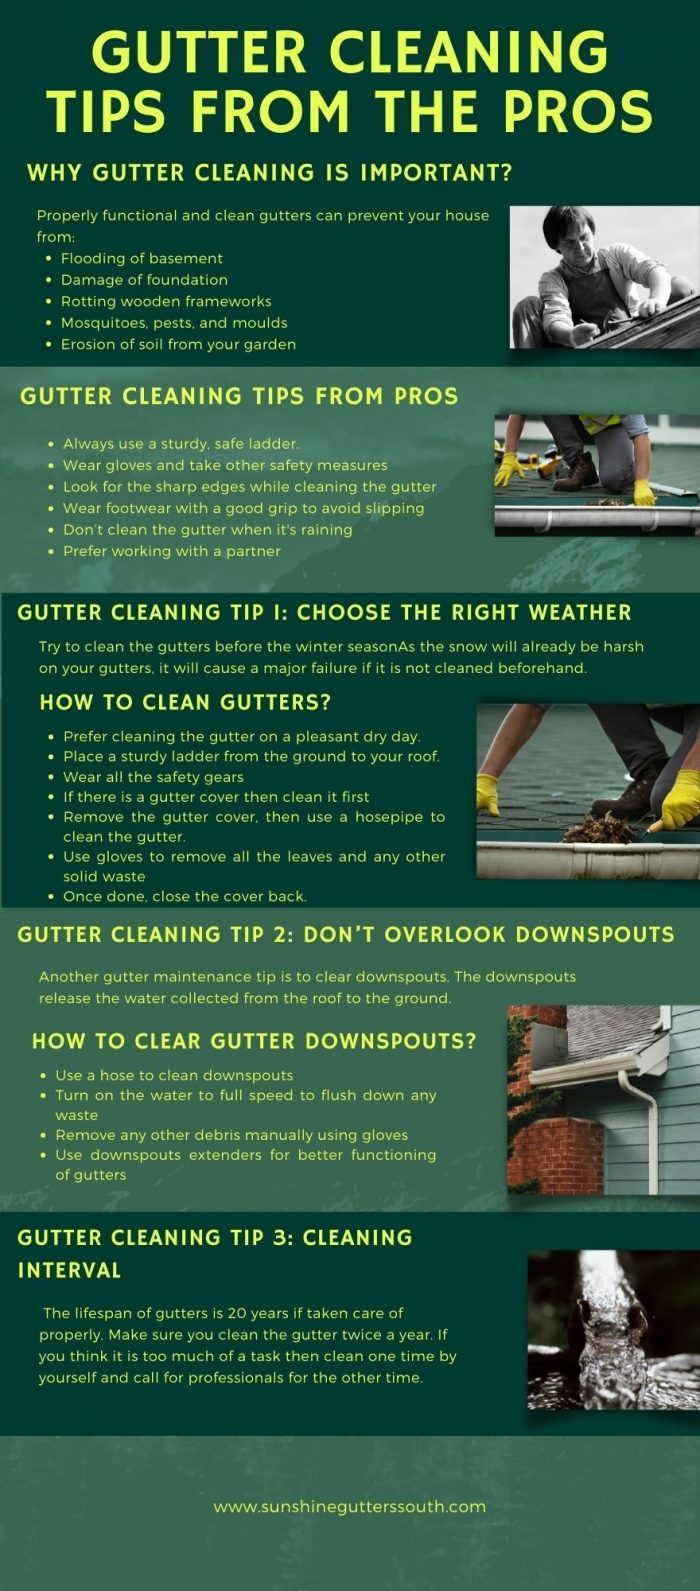 Gutter Cleaning Tips From The Pros